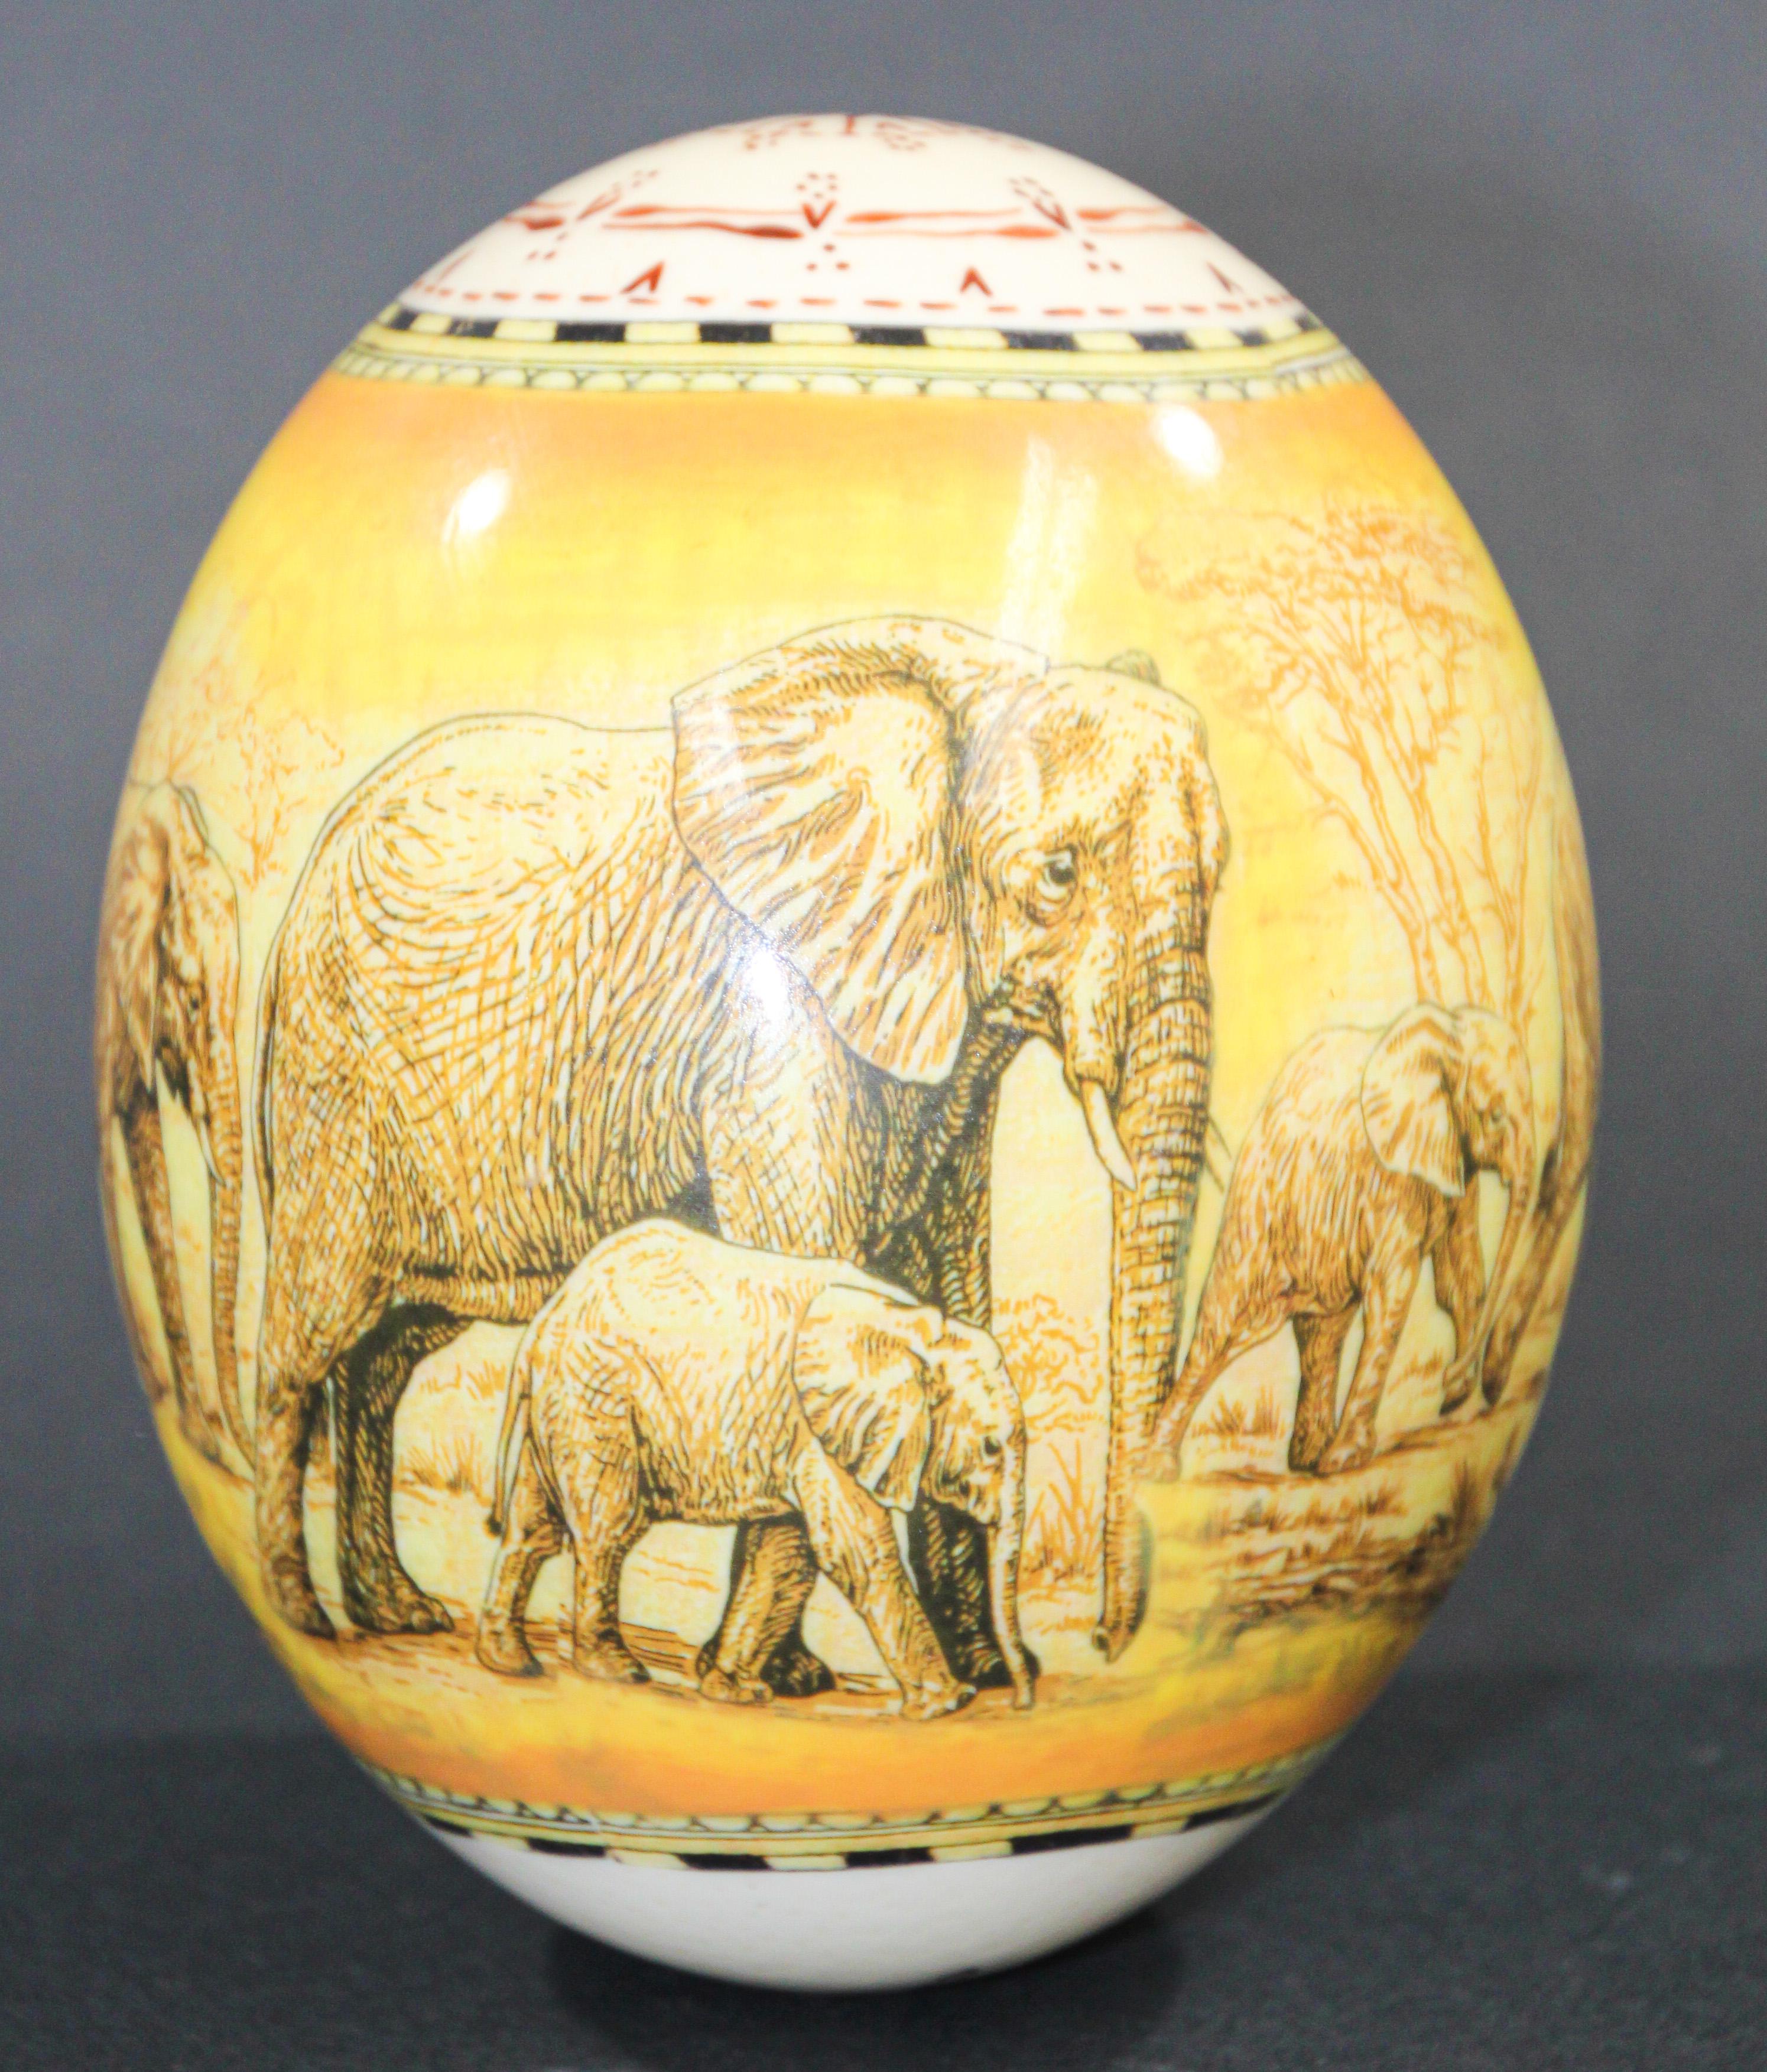 This beautiful scene of elephants painting on an ostrich egg shell is hand painted and signed by an African artist. 
A symbol of the source of life, this collectable Ostrich egg is a coveted item for any collector. 
The wonderful coloration comes